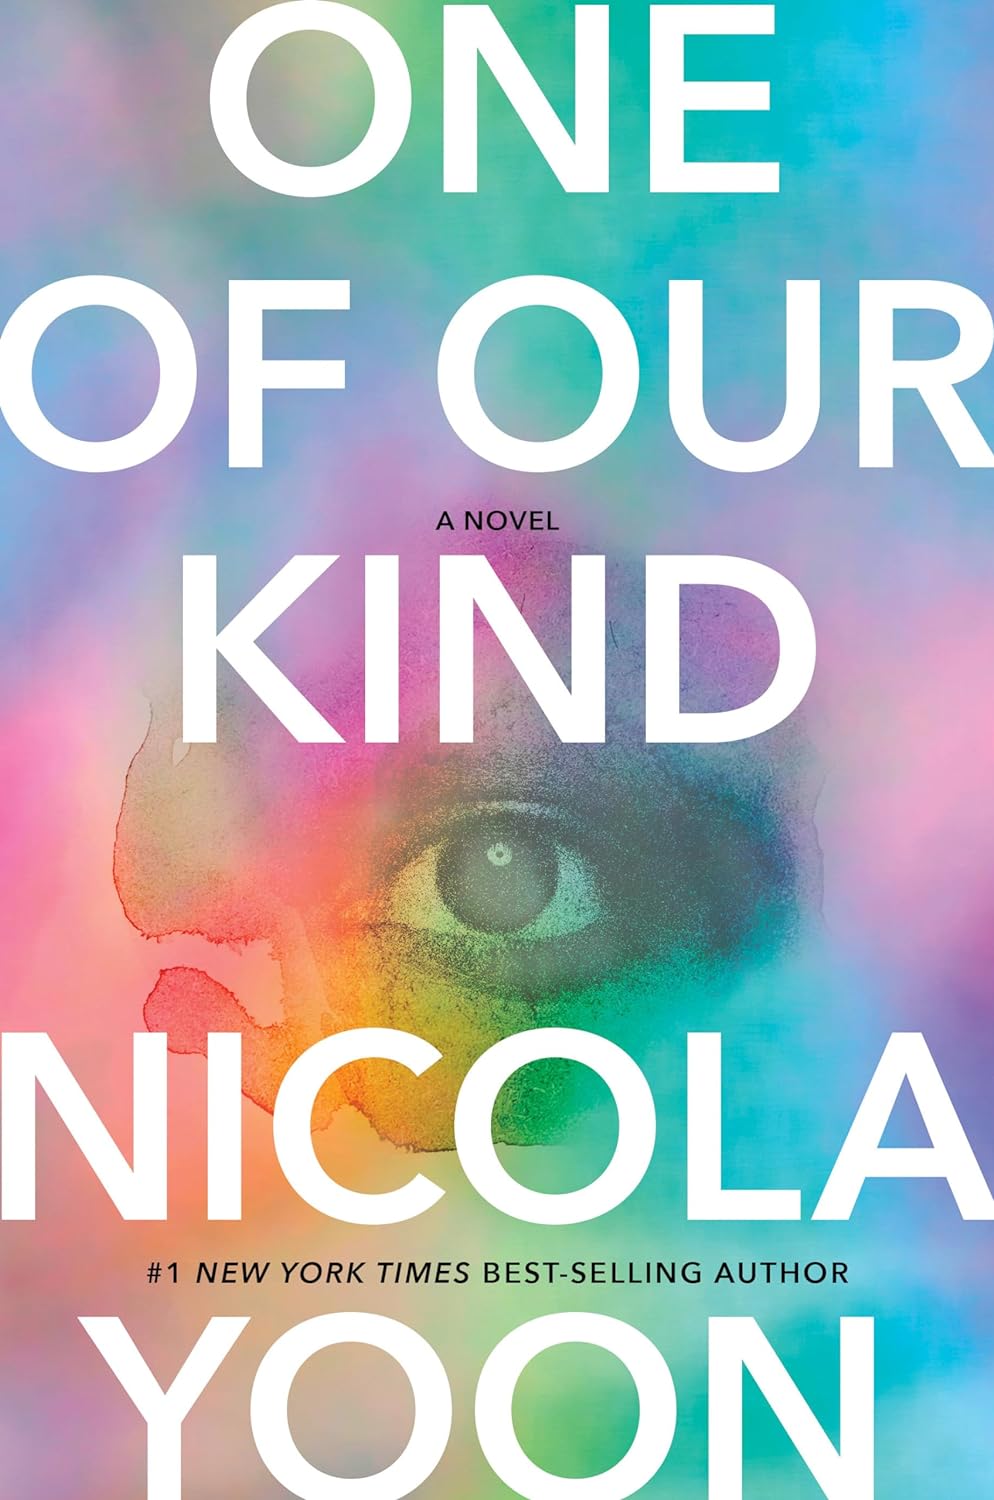 One of Our Kind: A Novel by Nicola Yoon